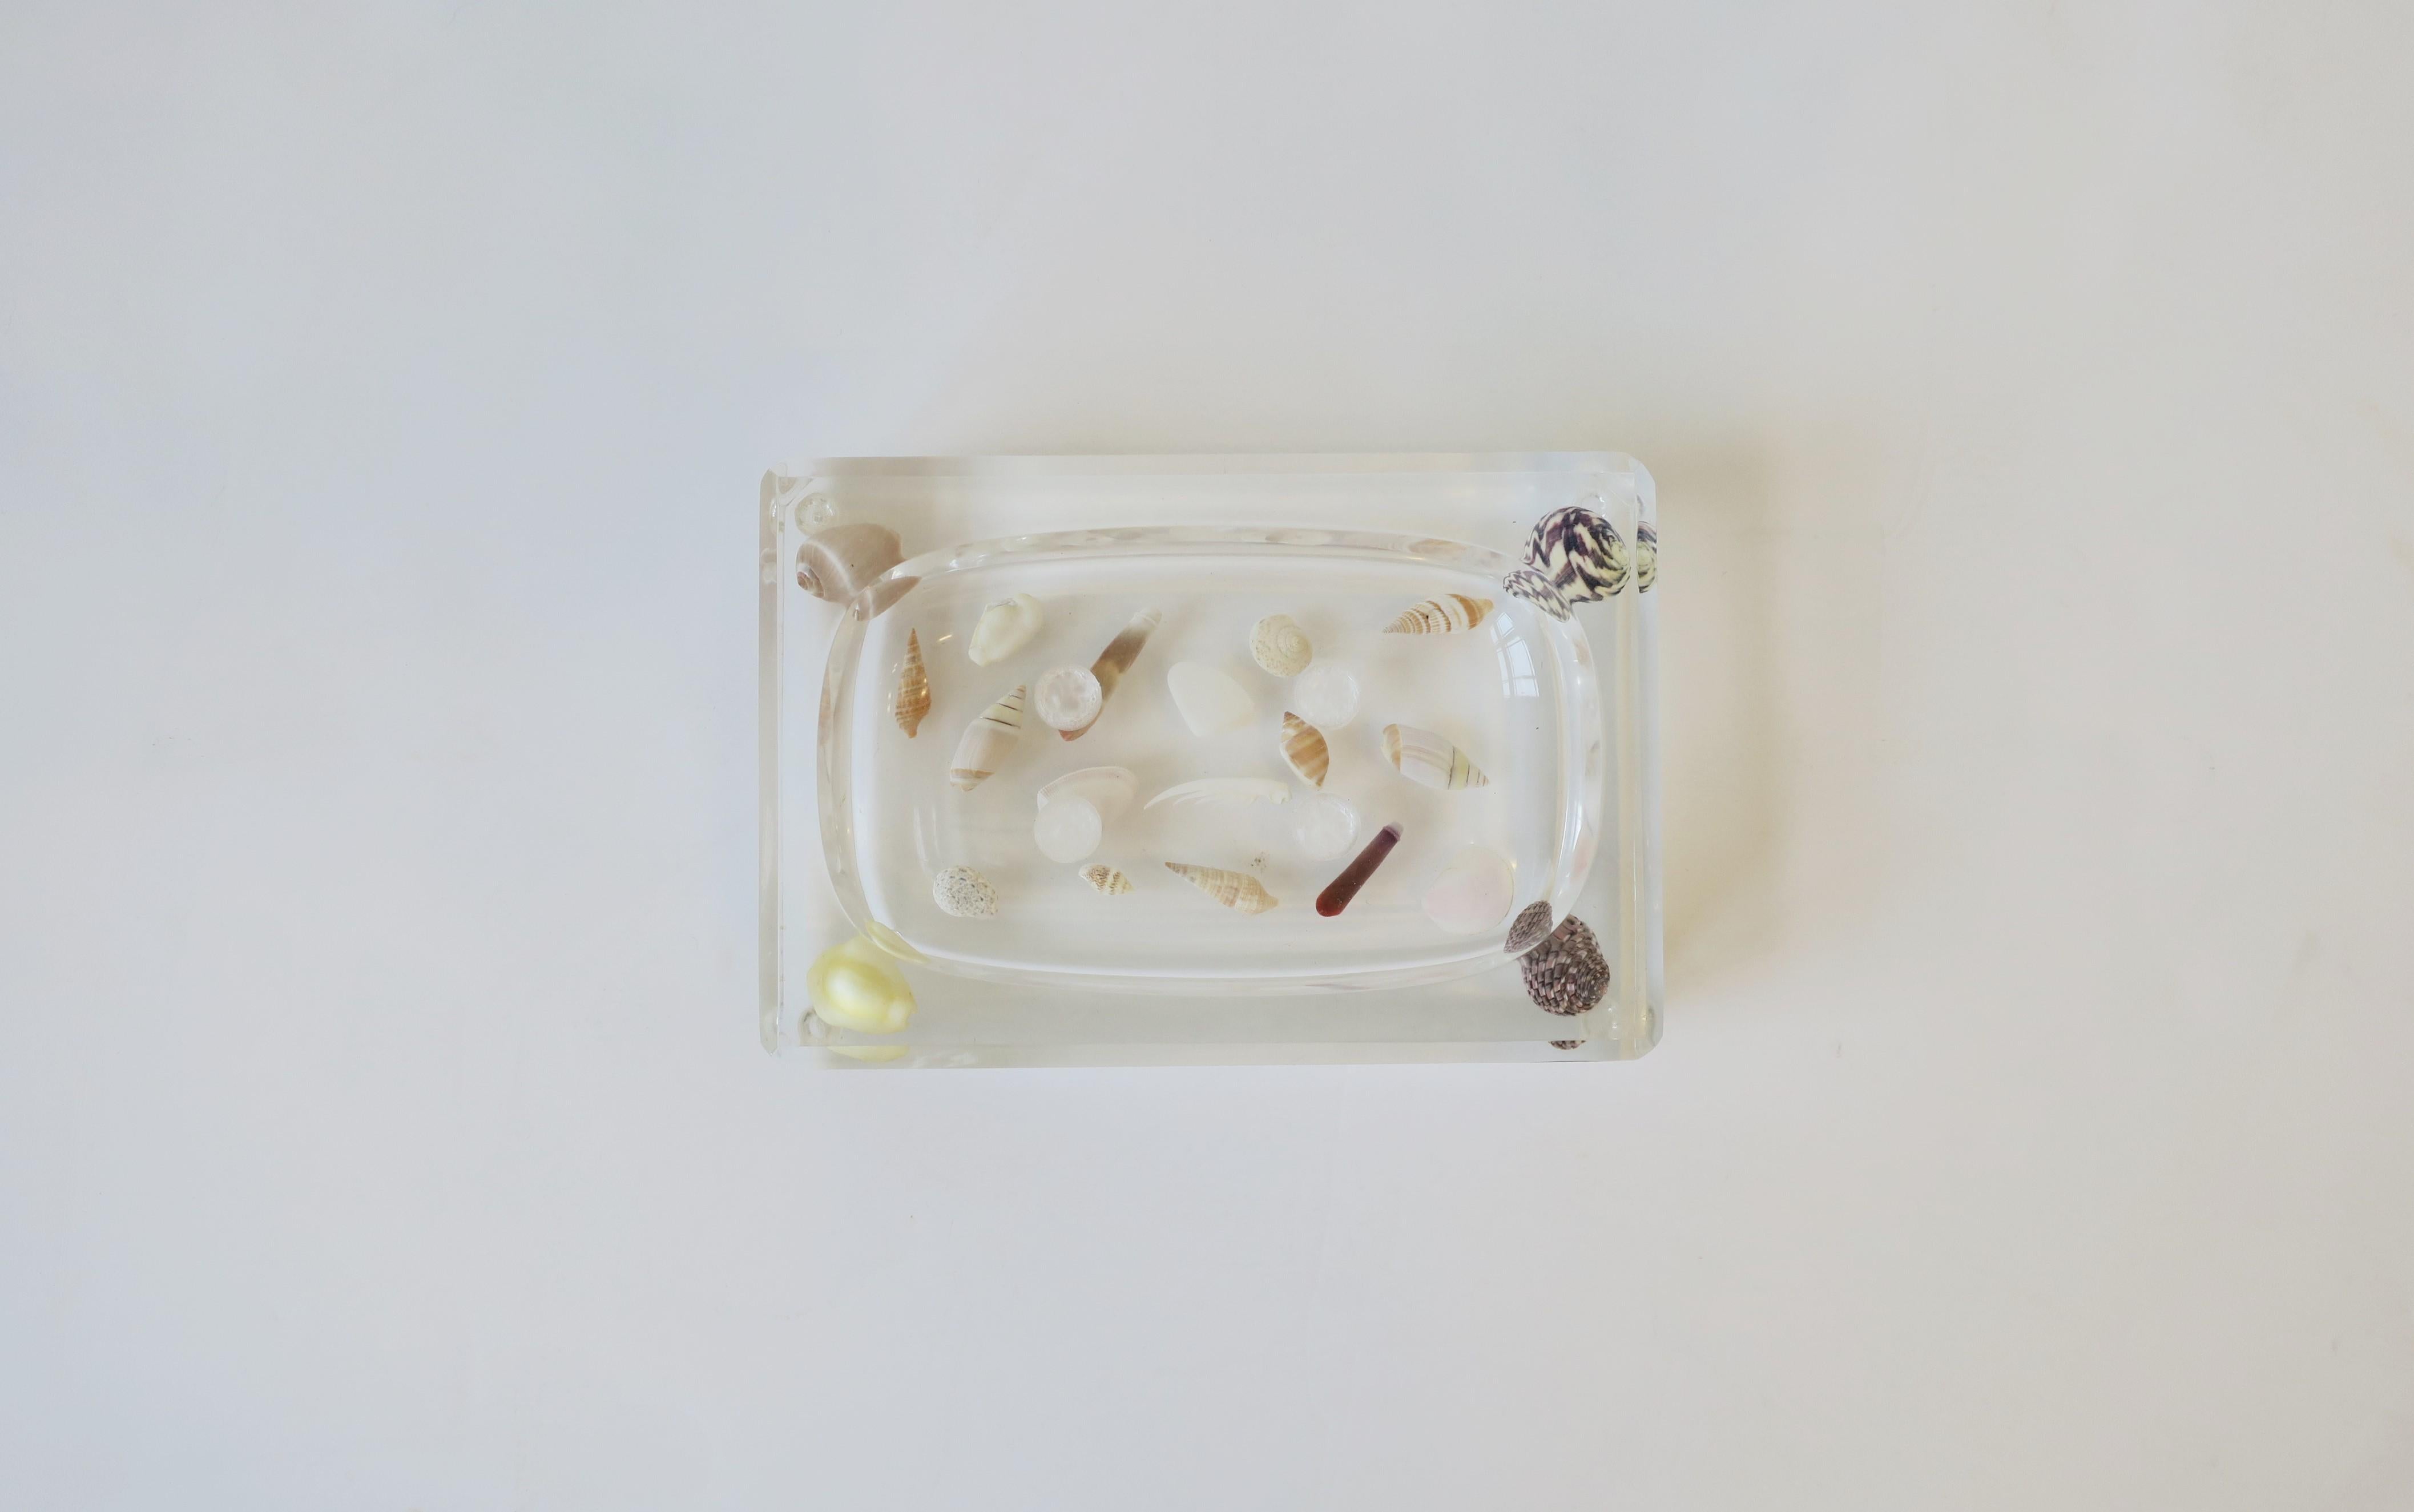 A great vintage acrylic and seashell soap dish, circa late-20th century, 1970s; fits a standard size bar of soap. Real natural seashells encased in acrylic. Dimensions: 1.63